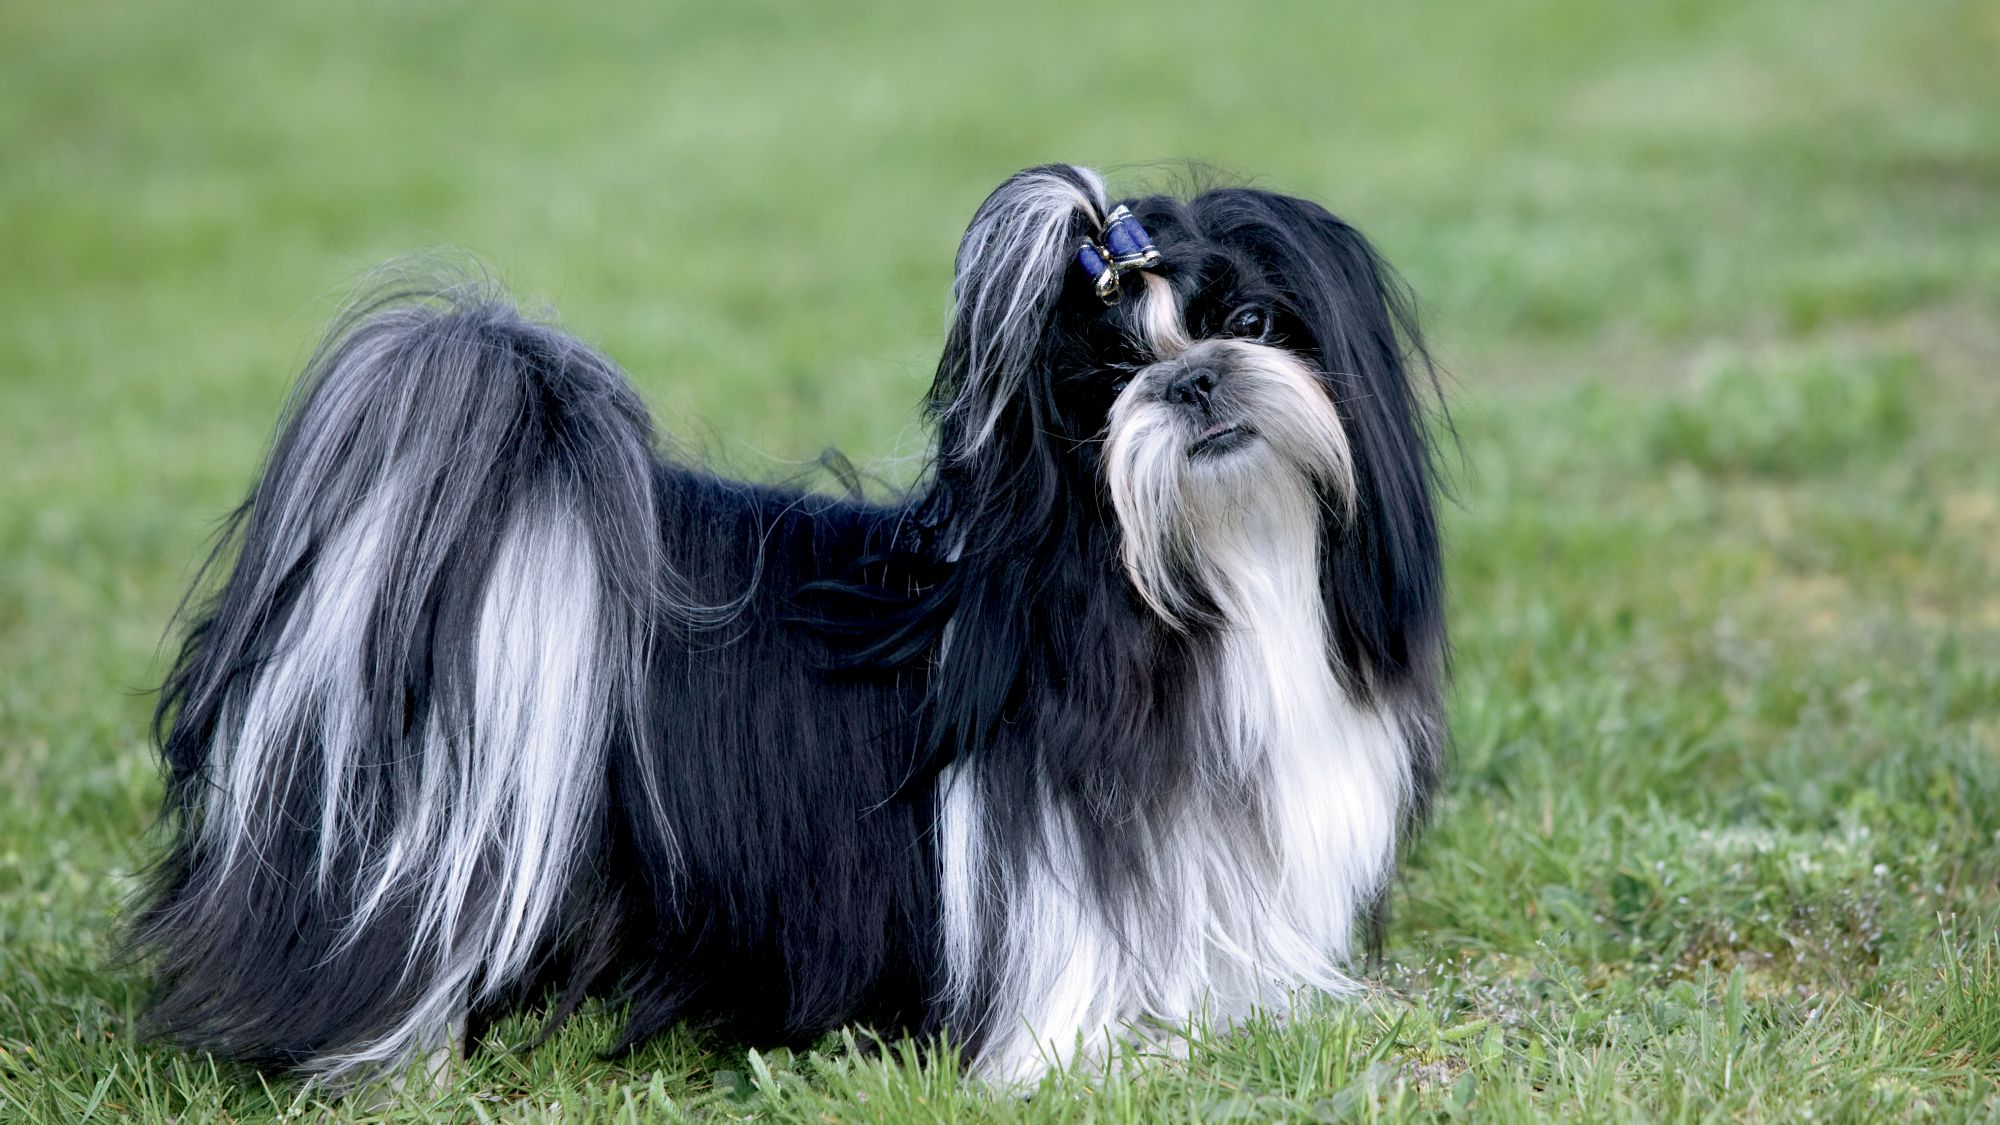 Shih Tzu standing on grass looking at camera